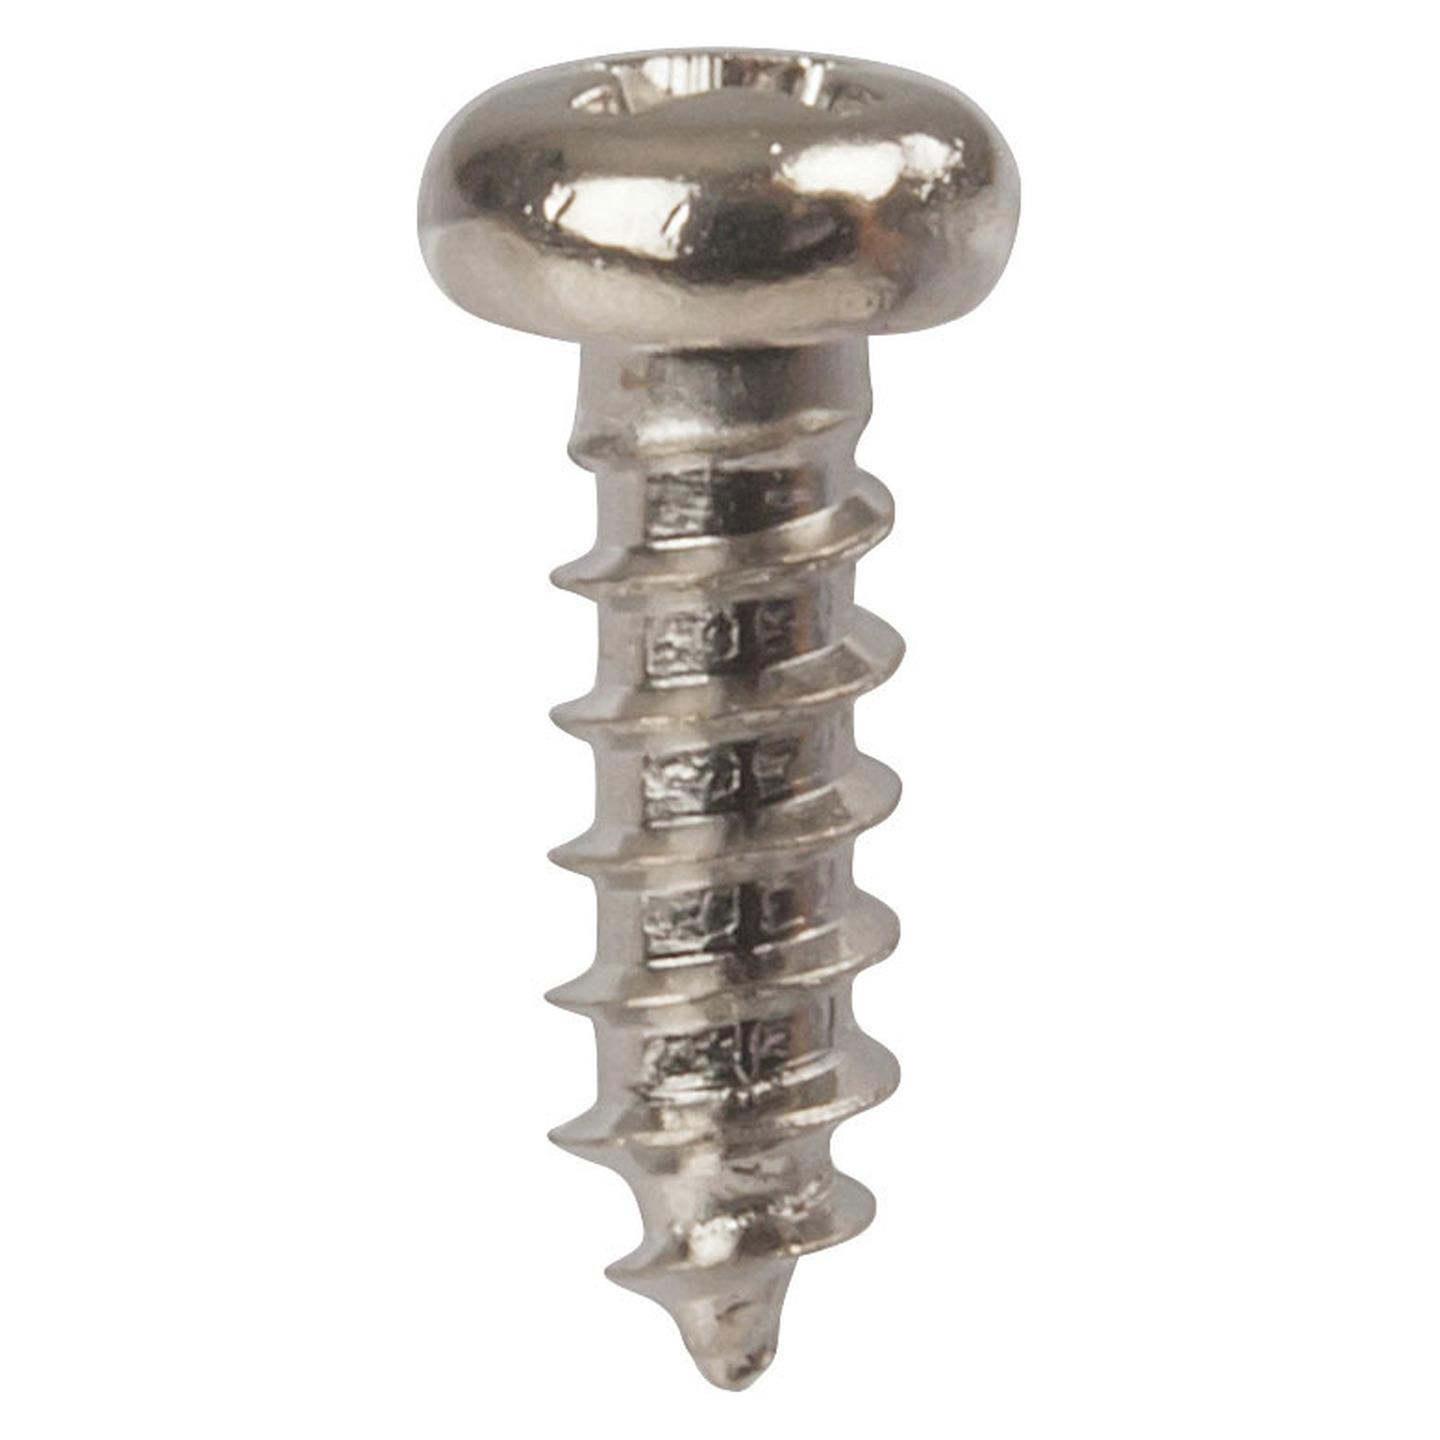 No.8 x 12mm Steel Self Tapping Screws - Pack of 25